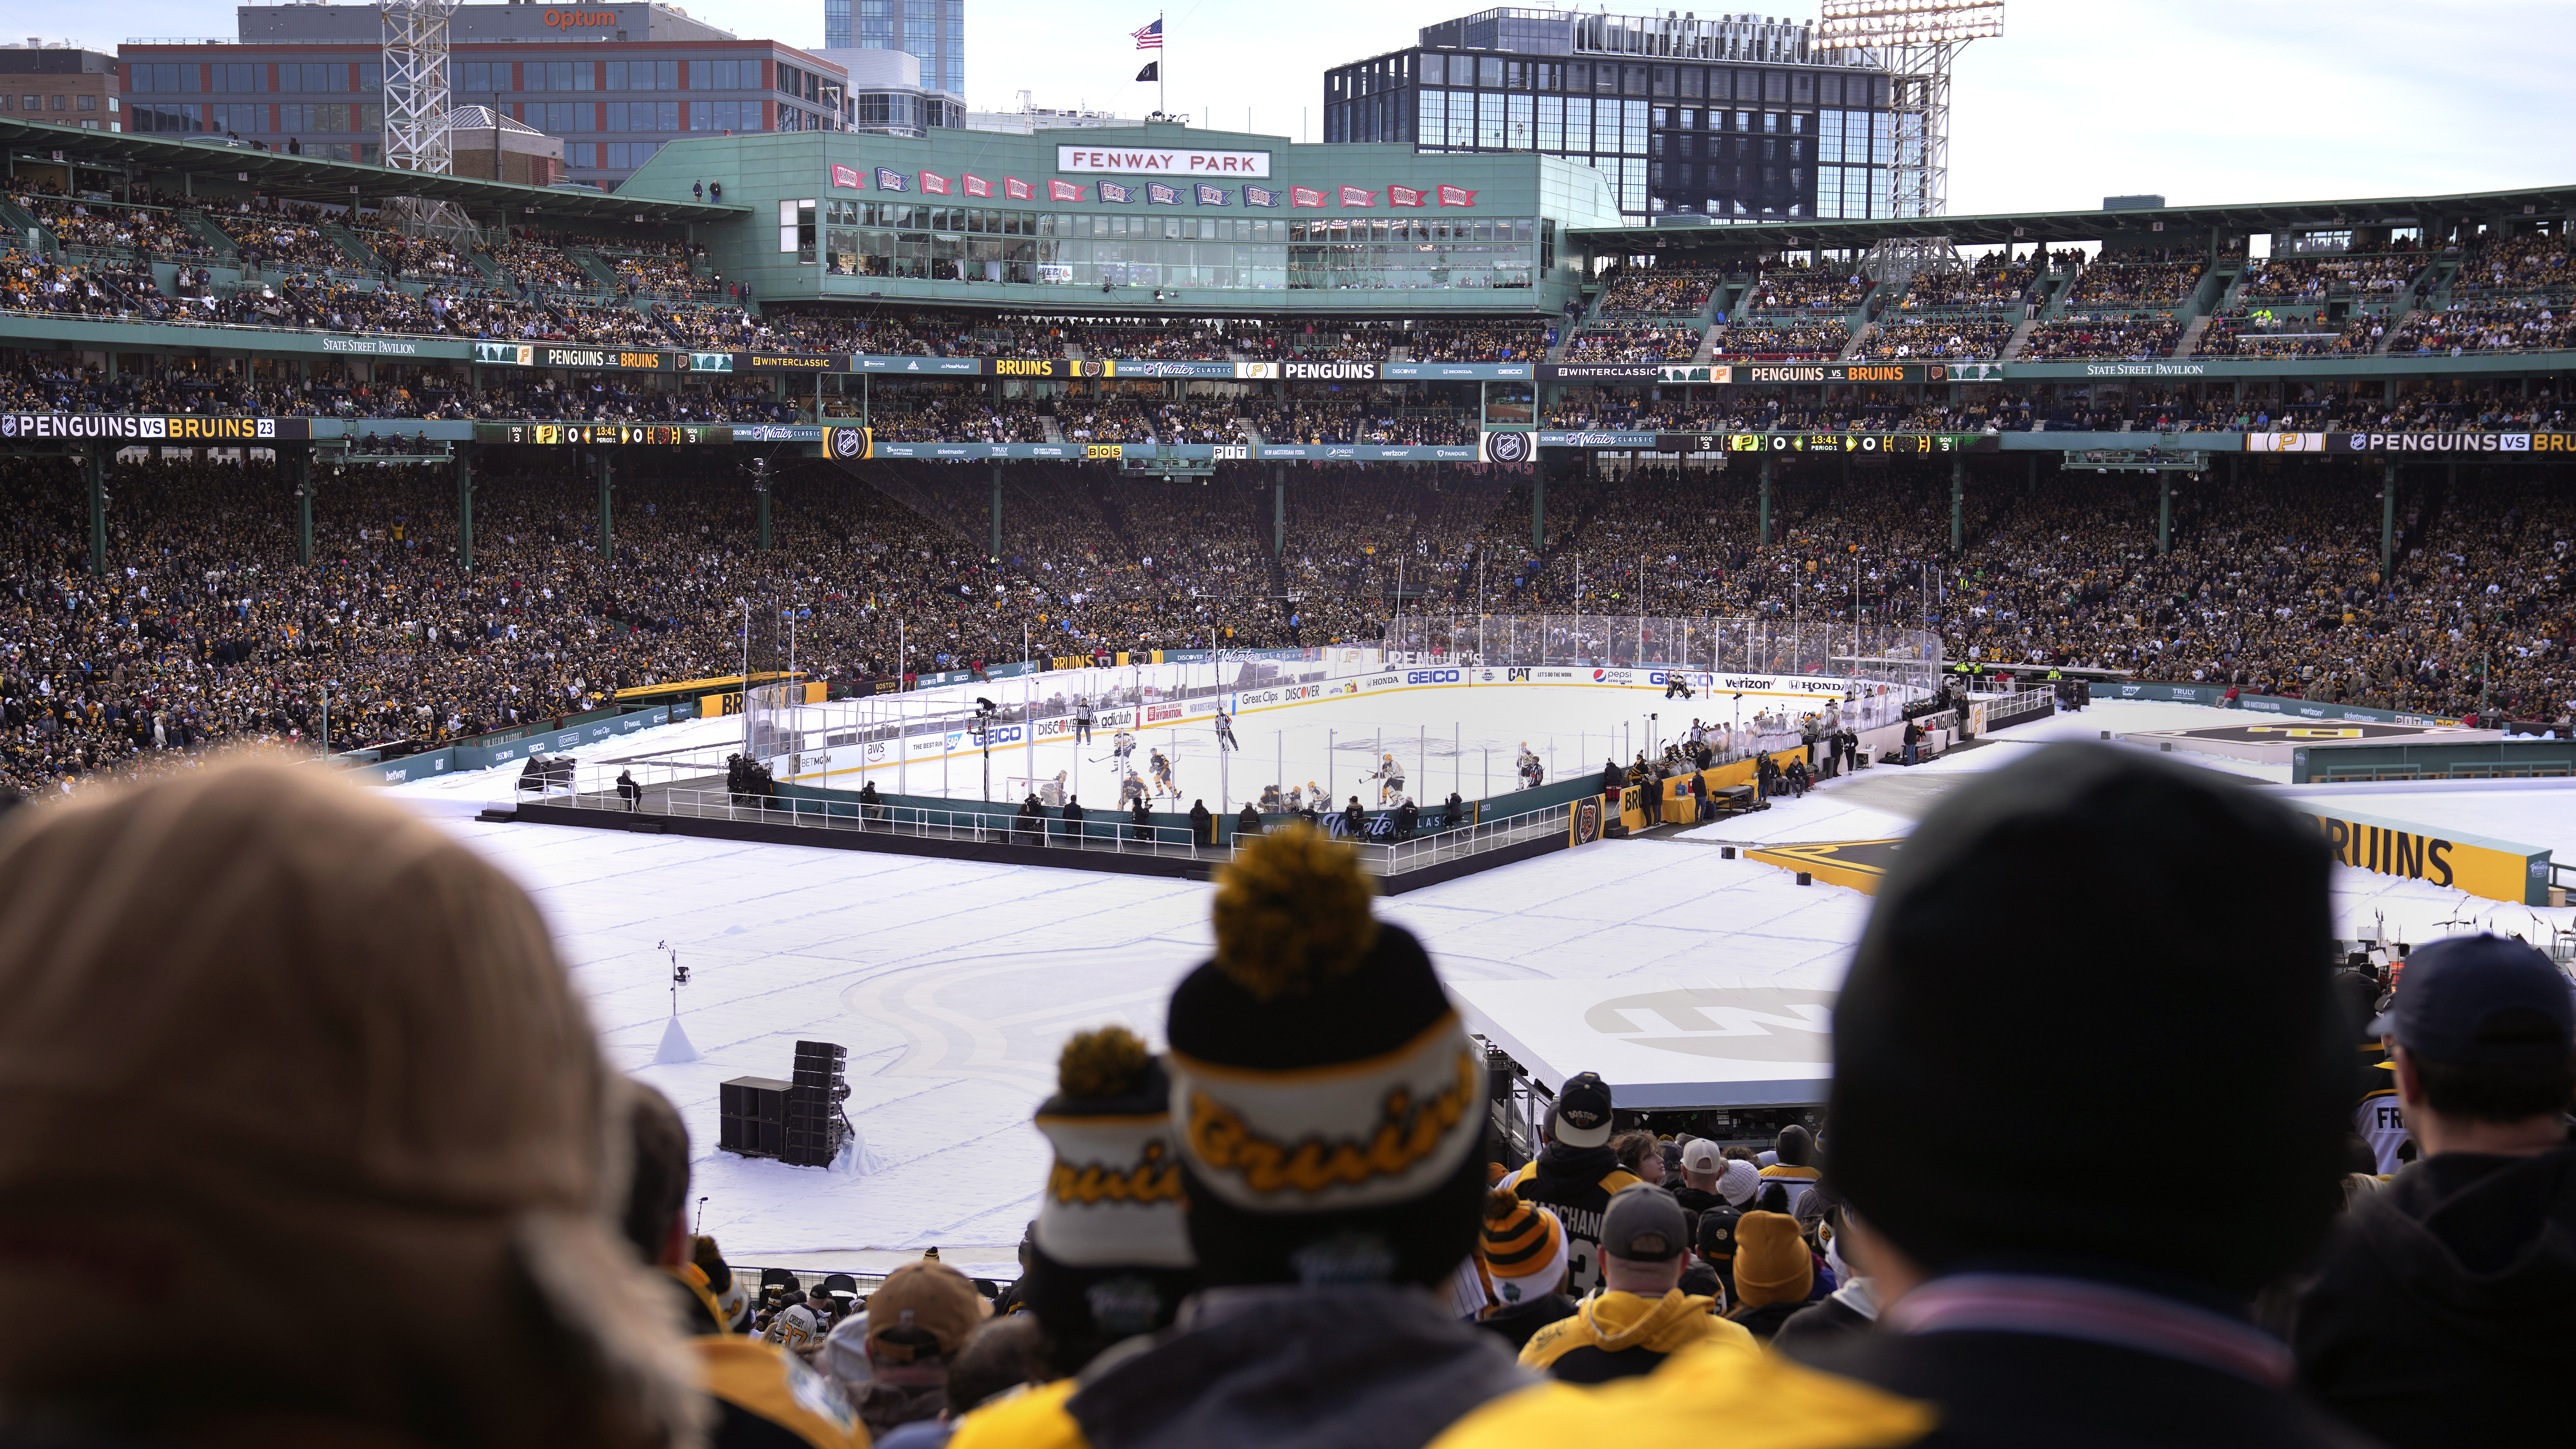 Bruins down Penguins in Winter Classic